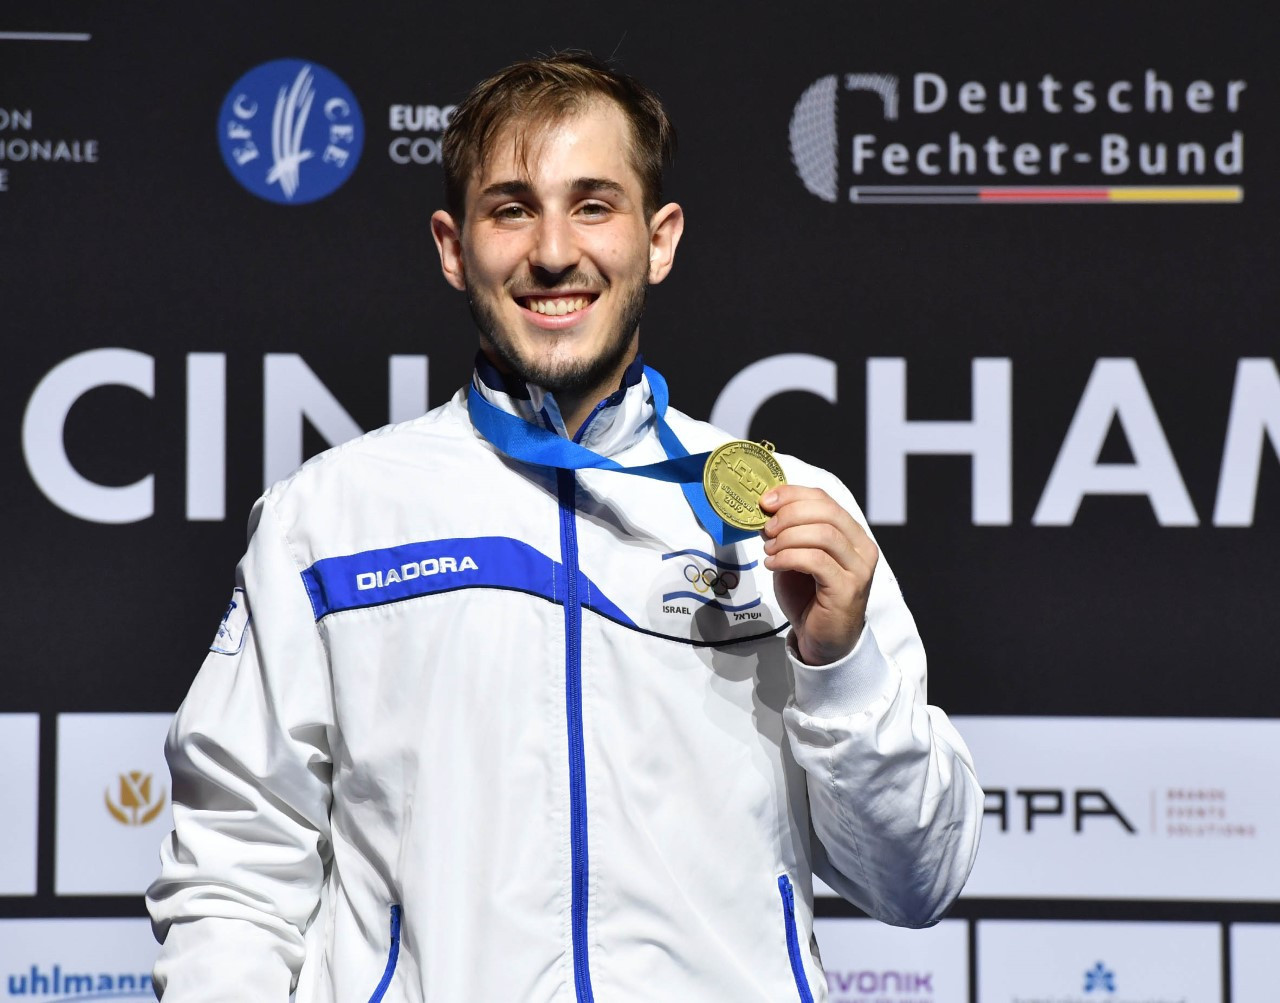 Unheralded Yuval Shalom Freilich triumphed in the men's épée at the European Fencing Championships ©CatchSport